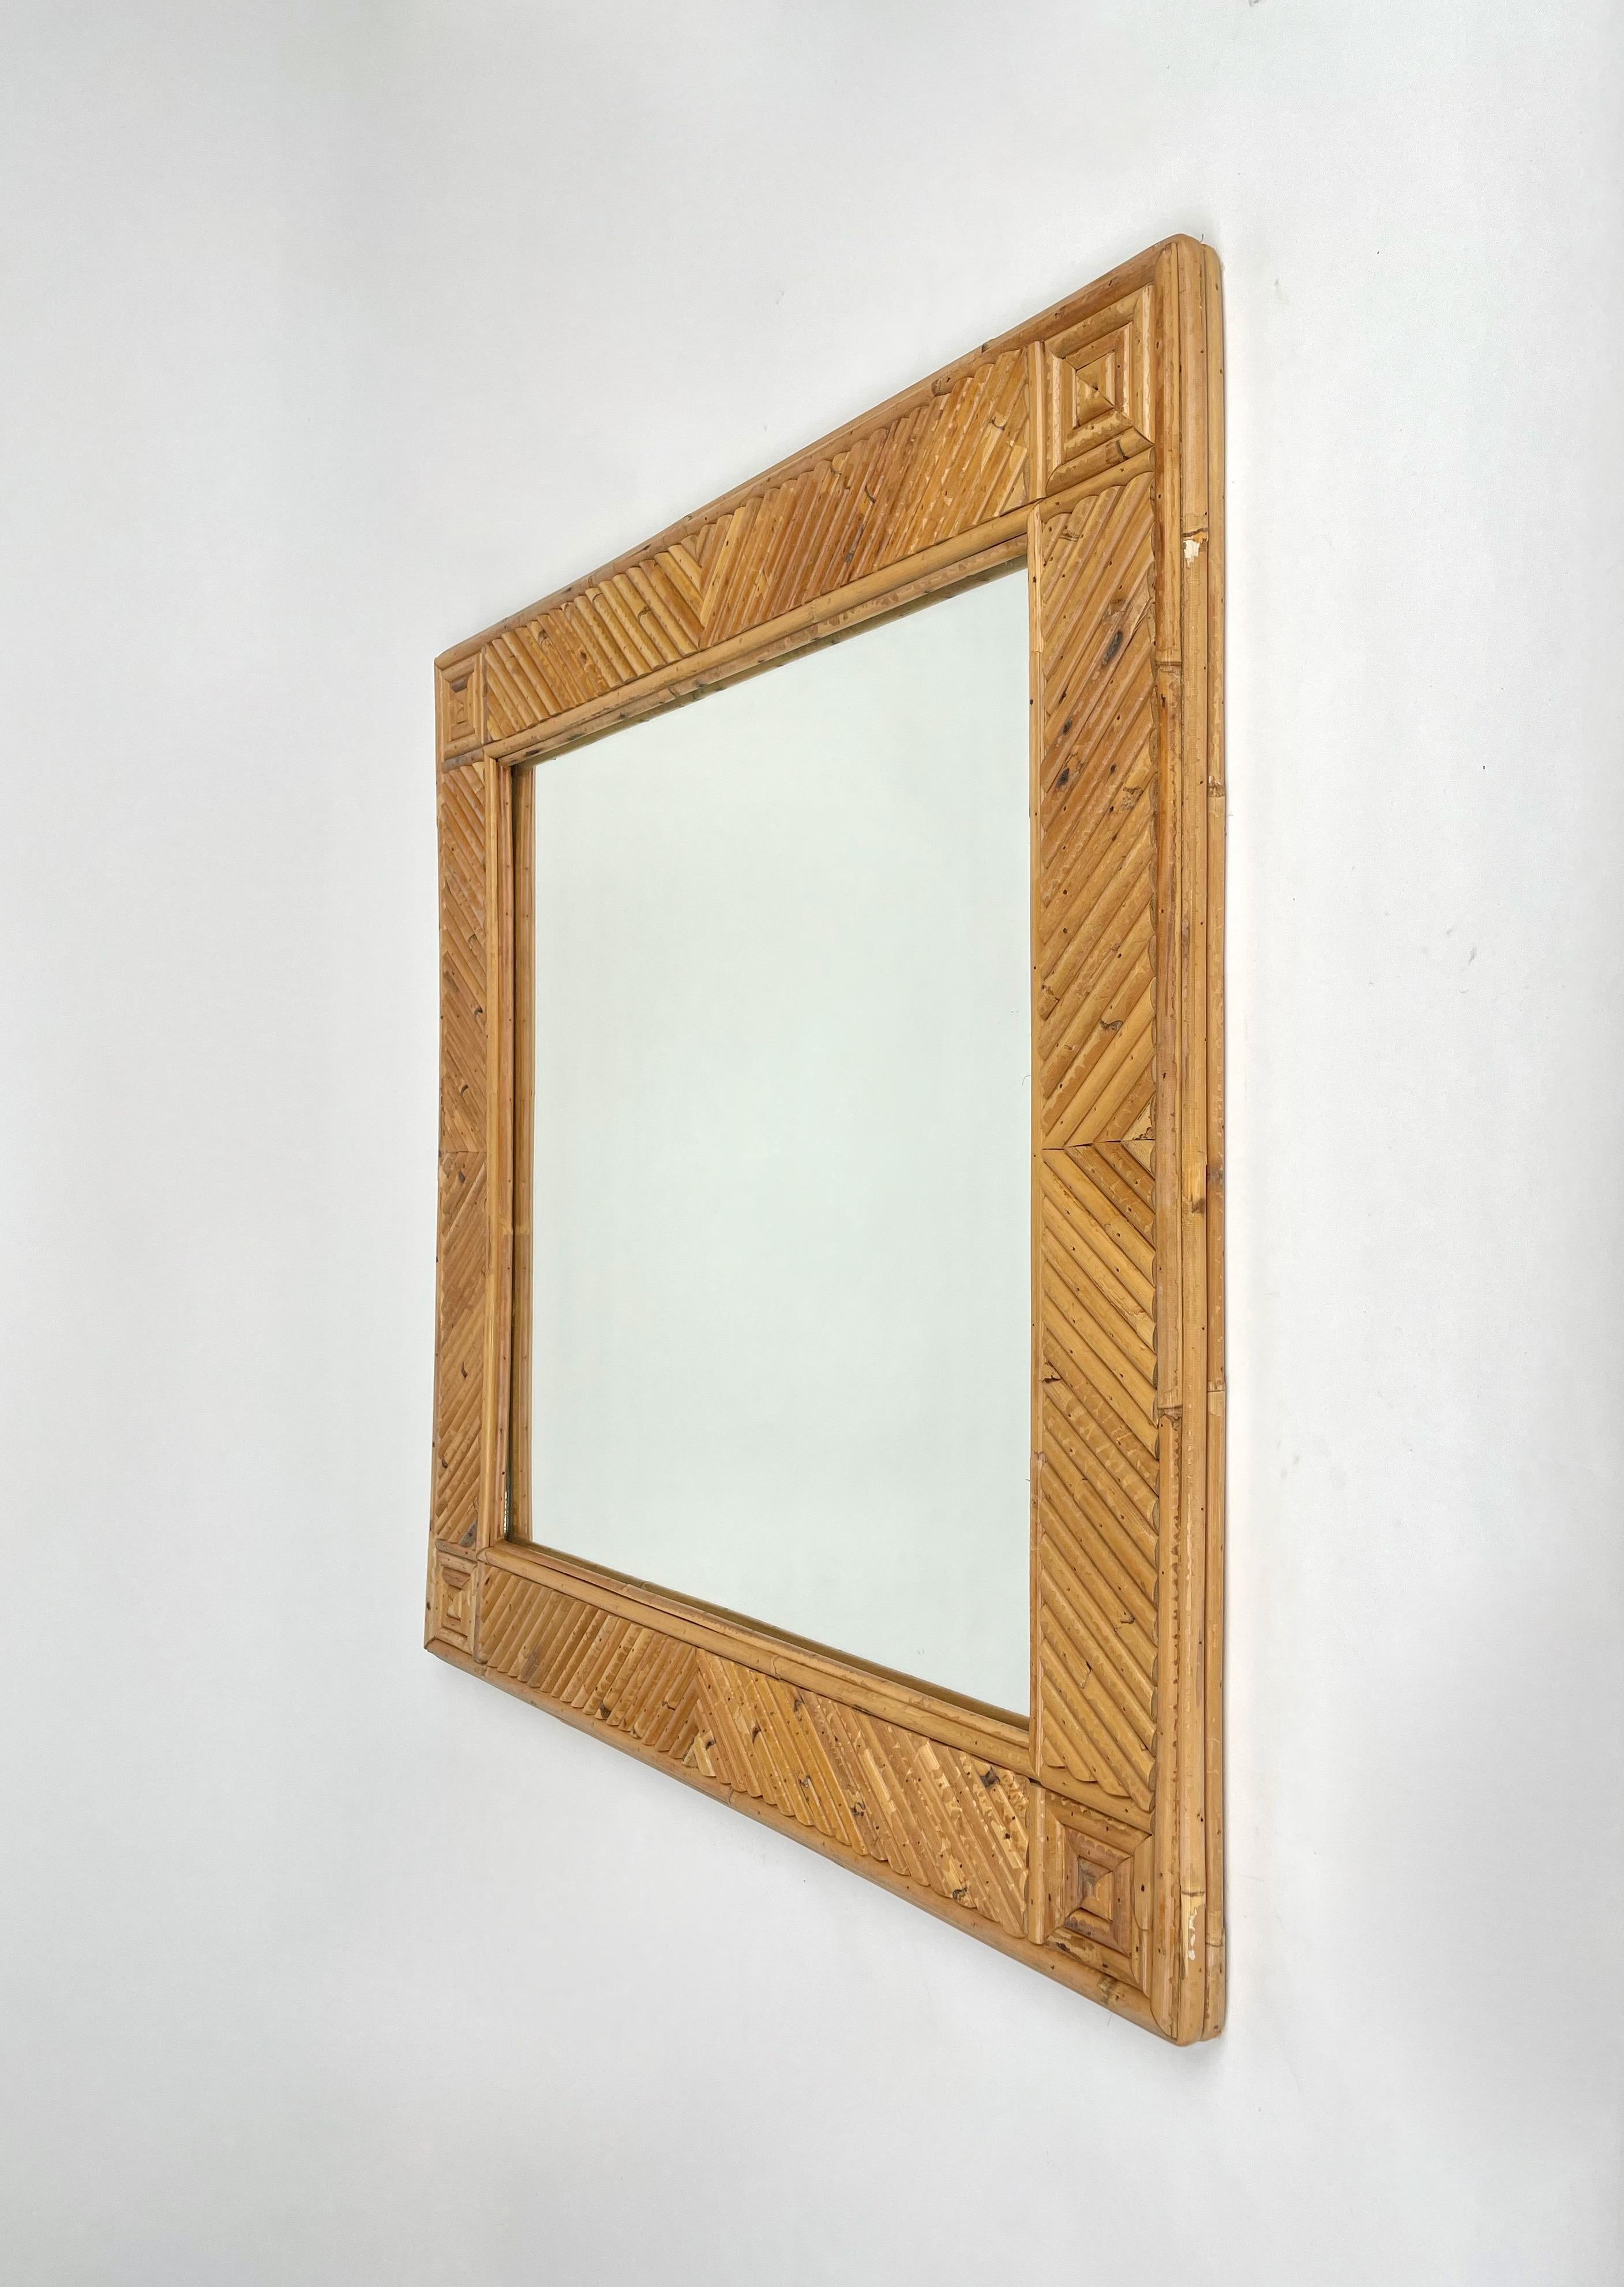 Italian Squared Wall Mirror Rattan & Bamboo Attributed to Vivai del Sud, Italy 1970s For Sale